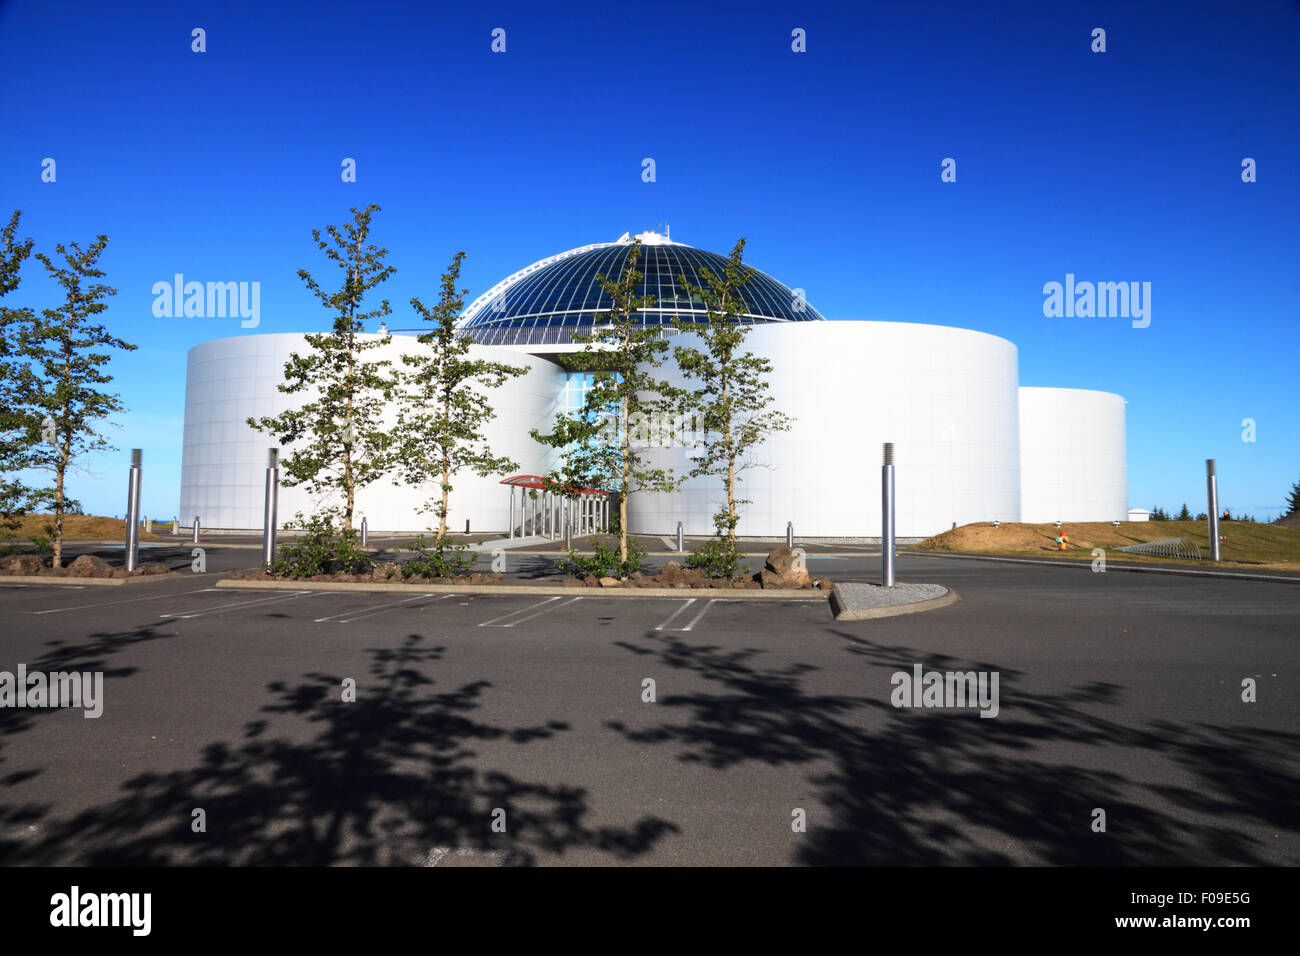 A group of cylindrical metal tanks with flags and deep blue sky. Stock Photo